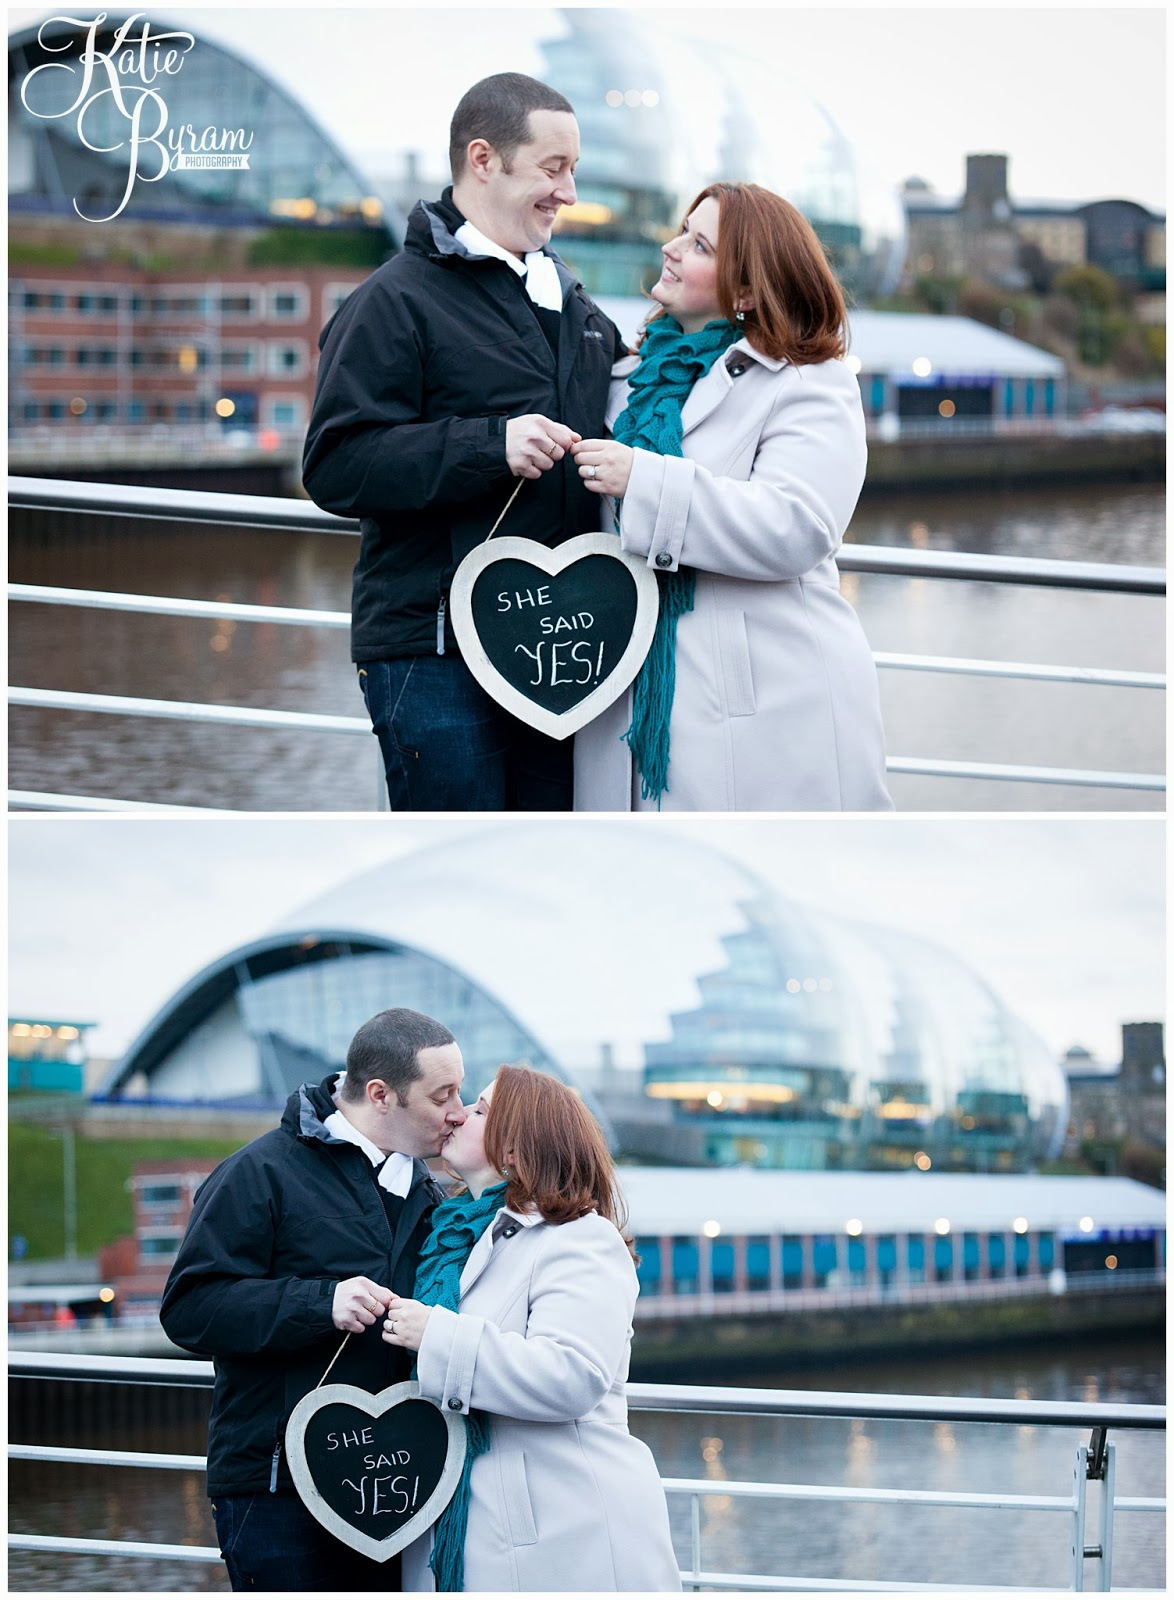 she said yes sign, newcastle quayside engagement, newcastle pre-wedding shoot, newcastle quayside portraits, tyne bride engagement, christmas in newcastle, fenwicks window, millenium bridge engagement, pitcher and piano newcastle, olive and bean cafe, the baltic wedding, newcastle wedding photographer, katie byram photography